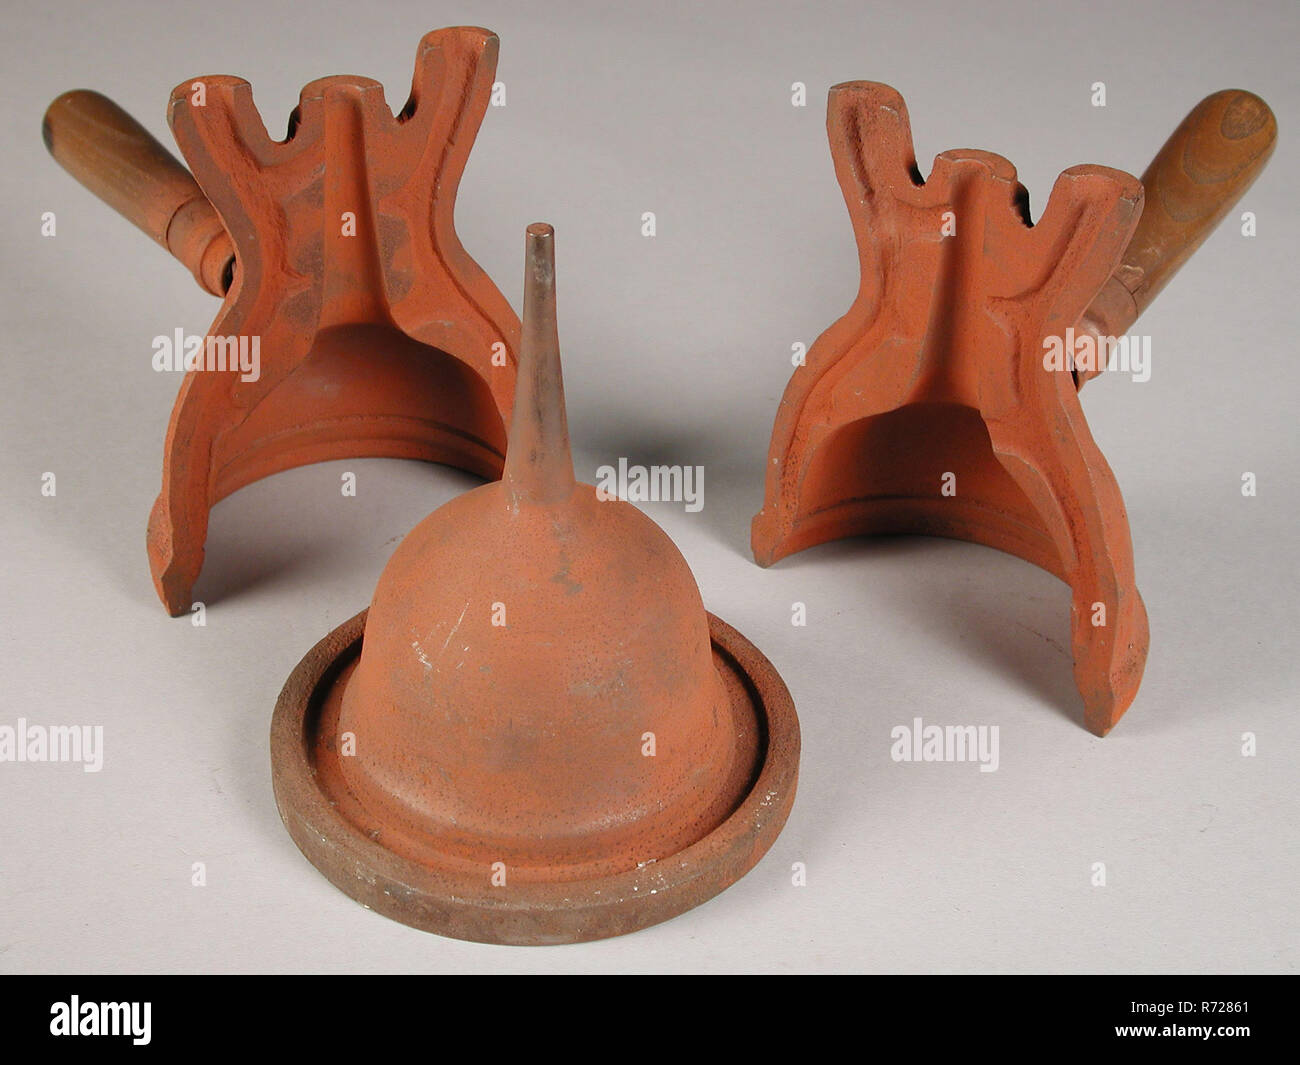 https://c8.alamy.com/comp/R72861/three-parts-of-four-part-cast-iron-mold-for-funnel-cast-molding-tool-equipment-kit-metal-metal-cast-iron-cast-four-part-cast-iron-mold-to-cast-funnel-with-the-centering-ring-to-hold-the-mold-together-lacking-is-the-core-rotterdam-tingieterij-tin-stainer-tin-meeuws-druy-craft-shapes-are-from-the-originally-18th-century-rotterdam-tinnegieter-j-druy-the-large-molds-that-were-not-signed-or-dated-were-the-property-of-the-tinker-guild-and-were-rented-to-the-small-tin-caster-R72861.jpg